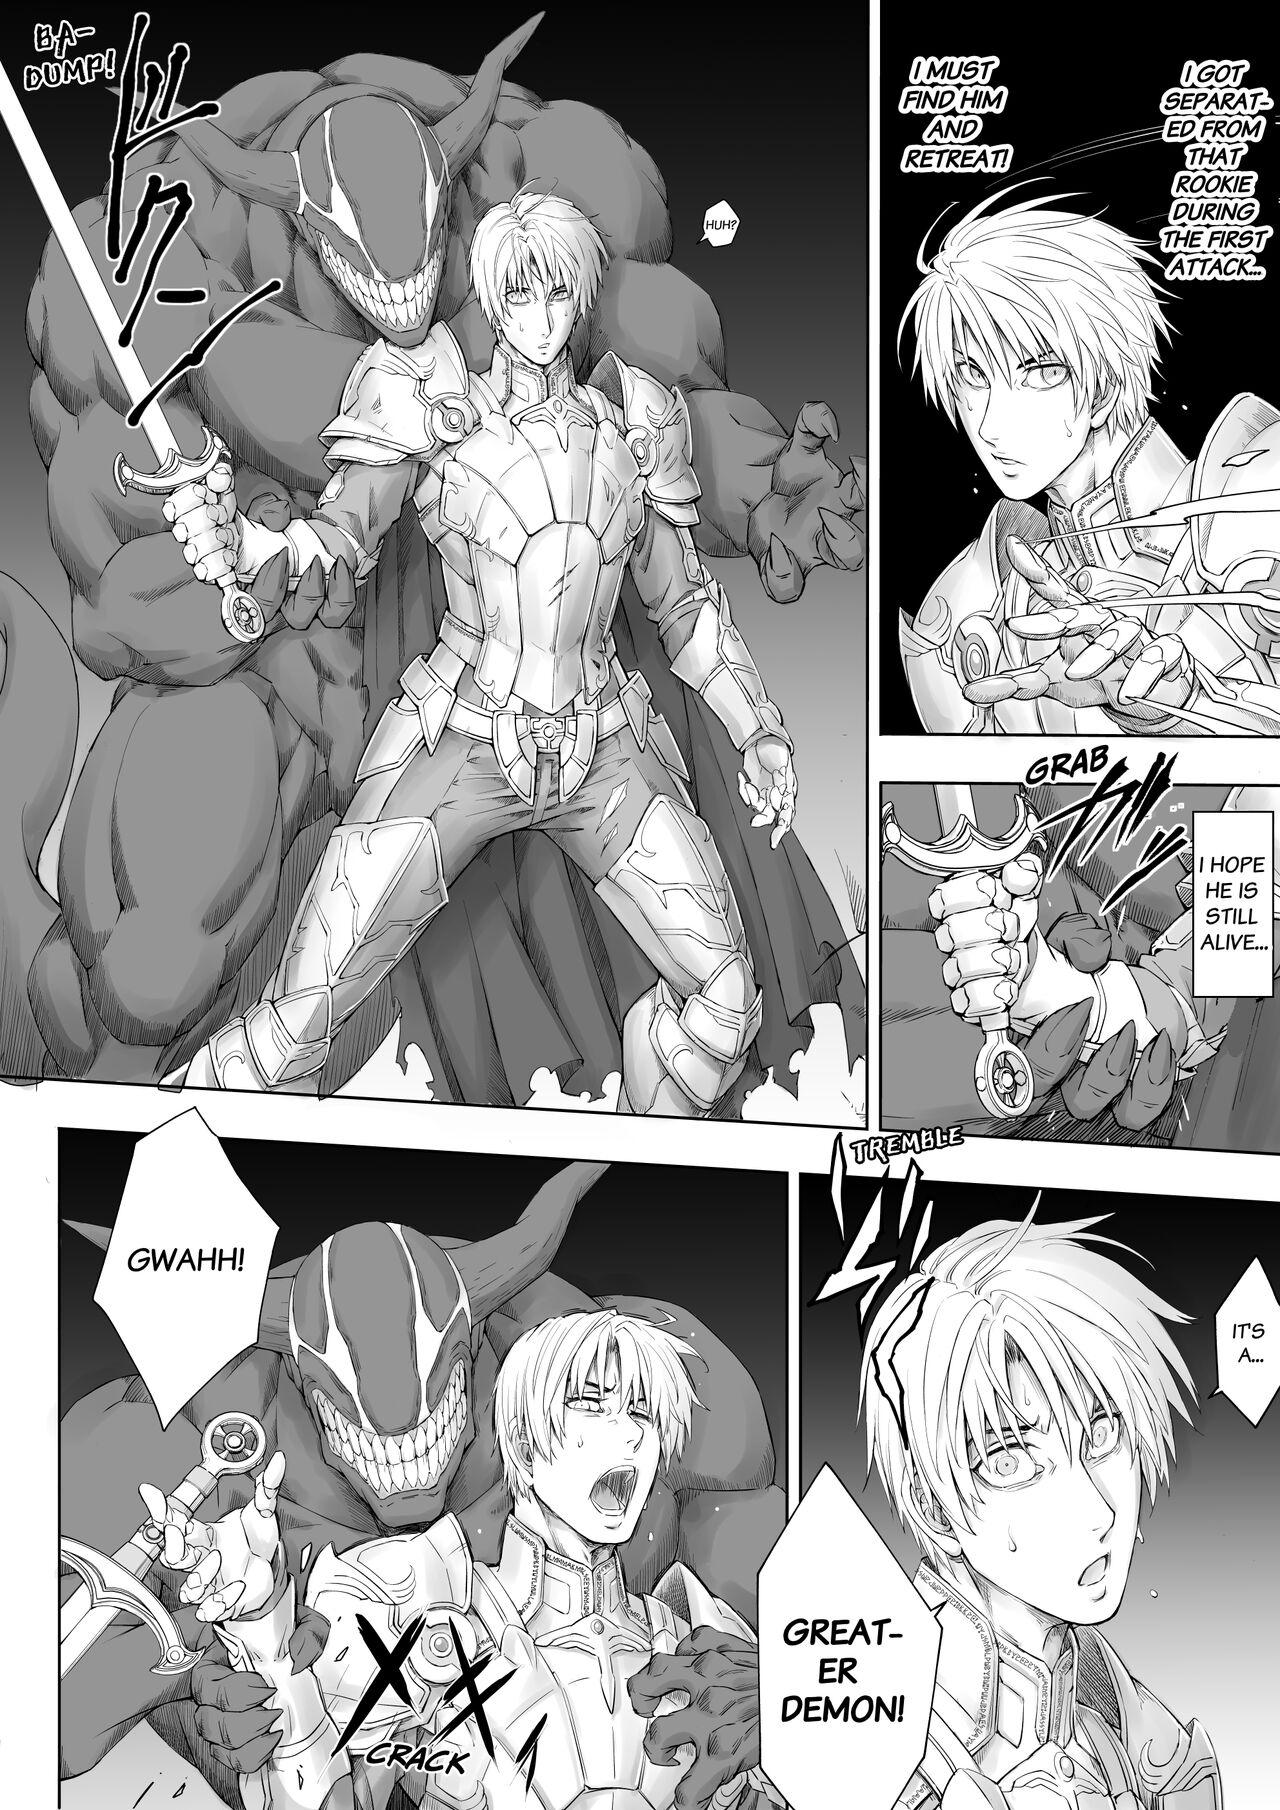 Assfingering Knight of the Labyrinth - Original Hiddencam - Page 8